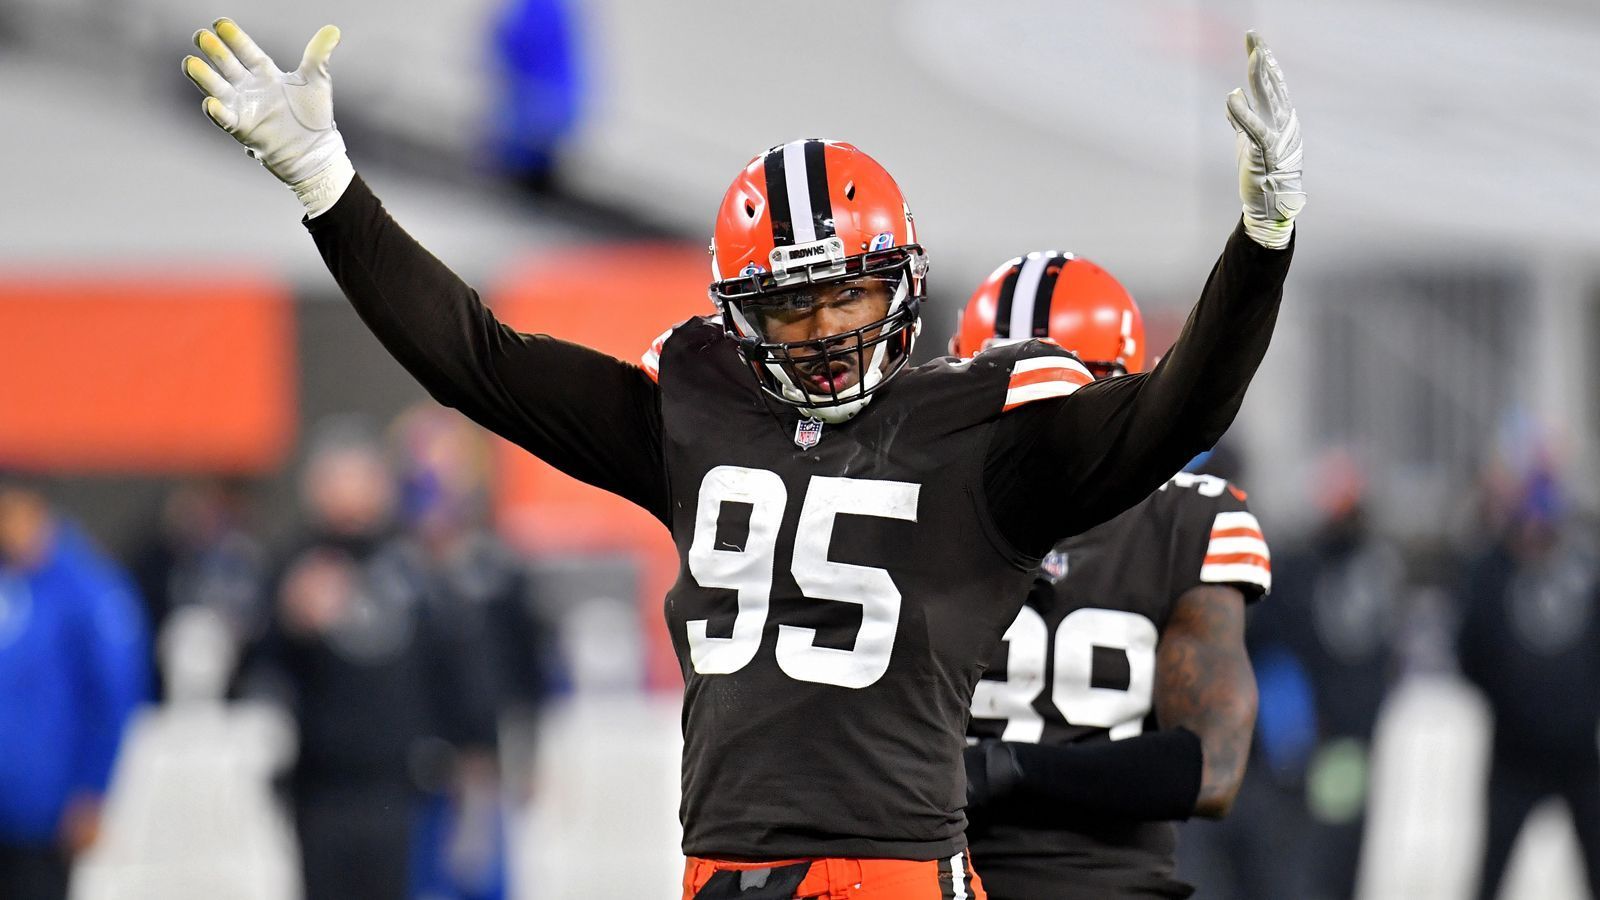 
                <strong>Defensive End</strong><br>
                AFC: Myles Garrett (Cleveland Browns, im Bild) - 244.899 - NFC: Chase Young (Washington Football Team) - 128.042
              